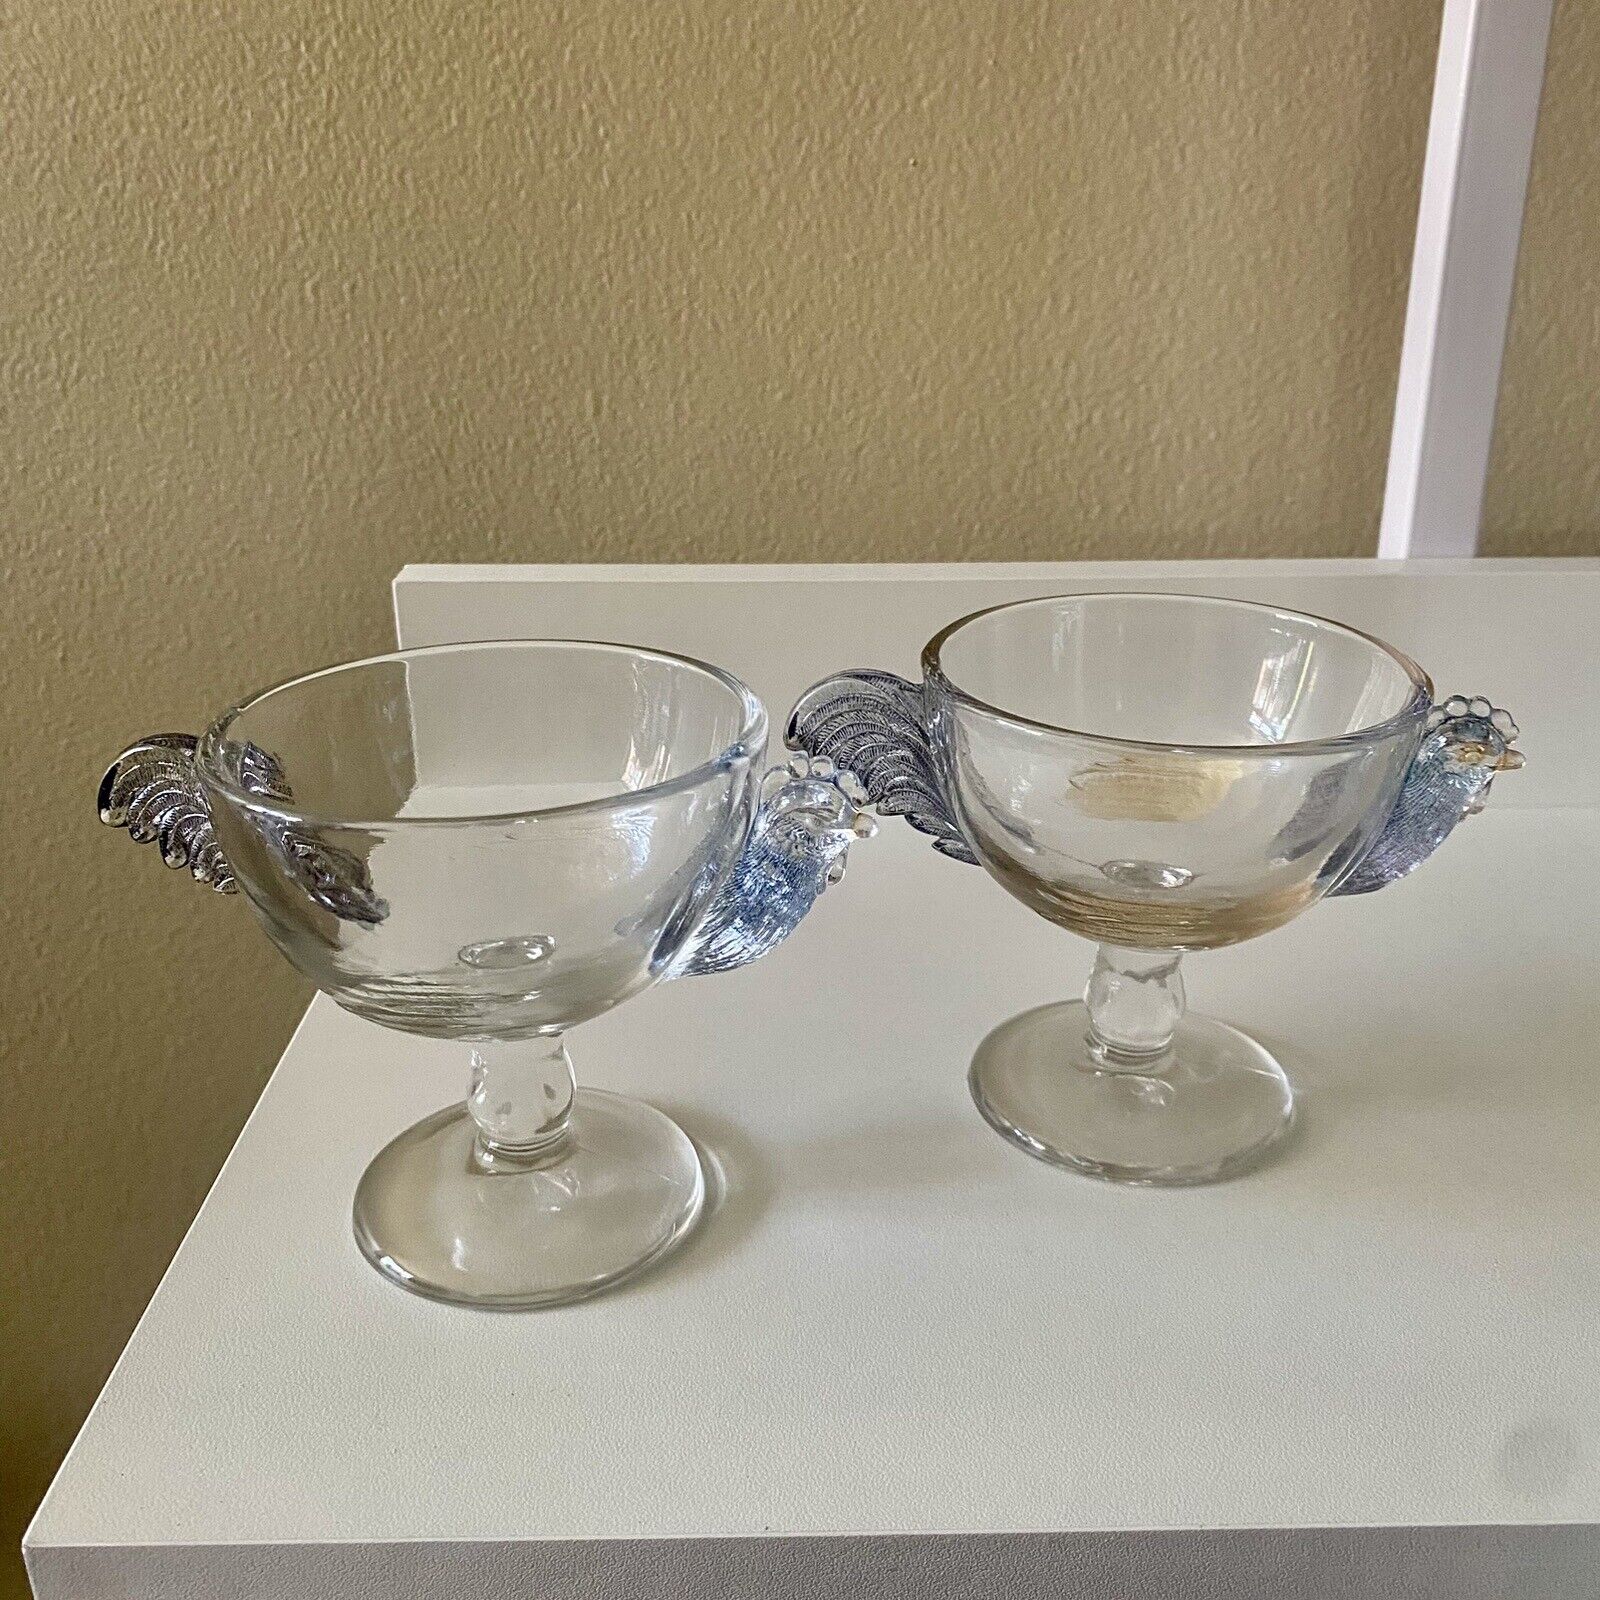 Vintage Clear Glass Dessert Cups With Colored Chicken Head, Tail, Wings Set Of 2